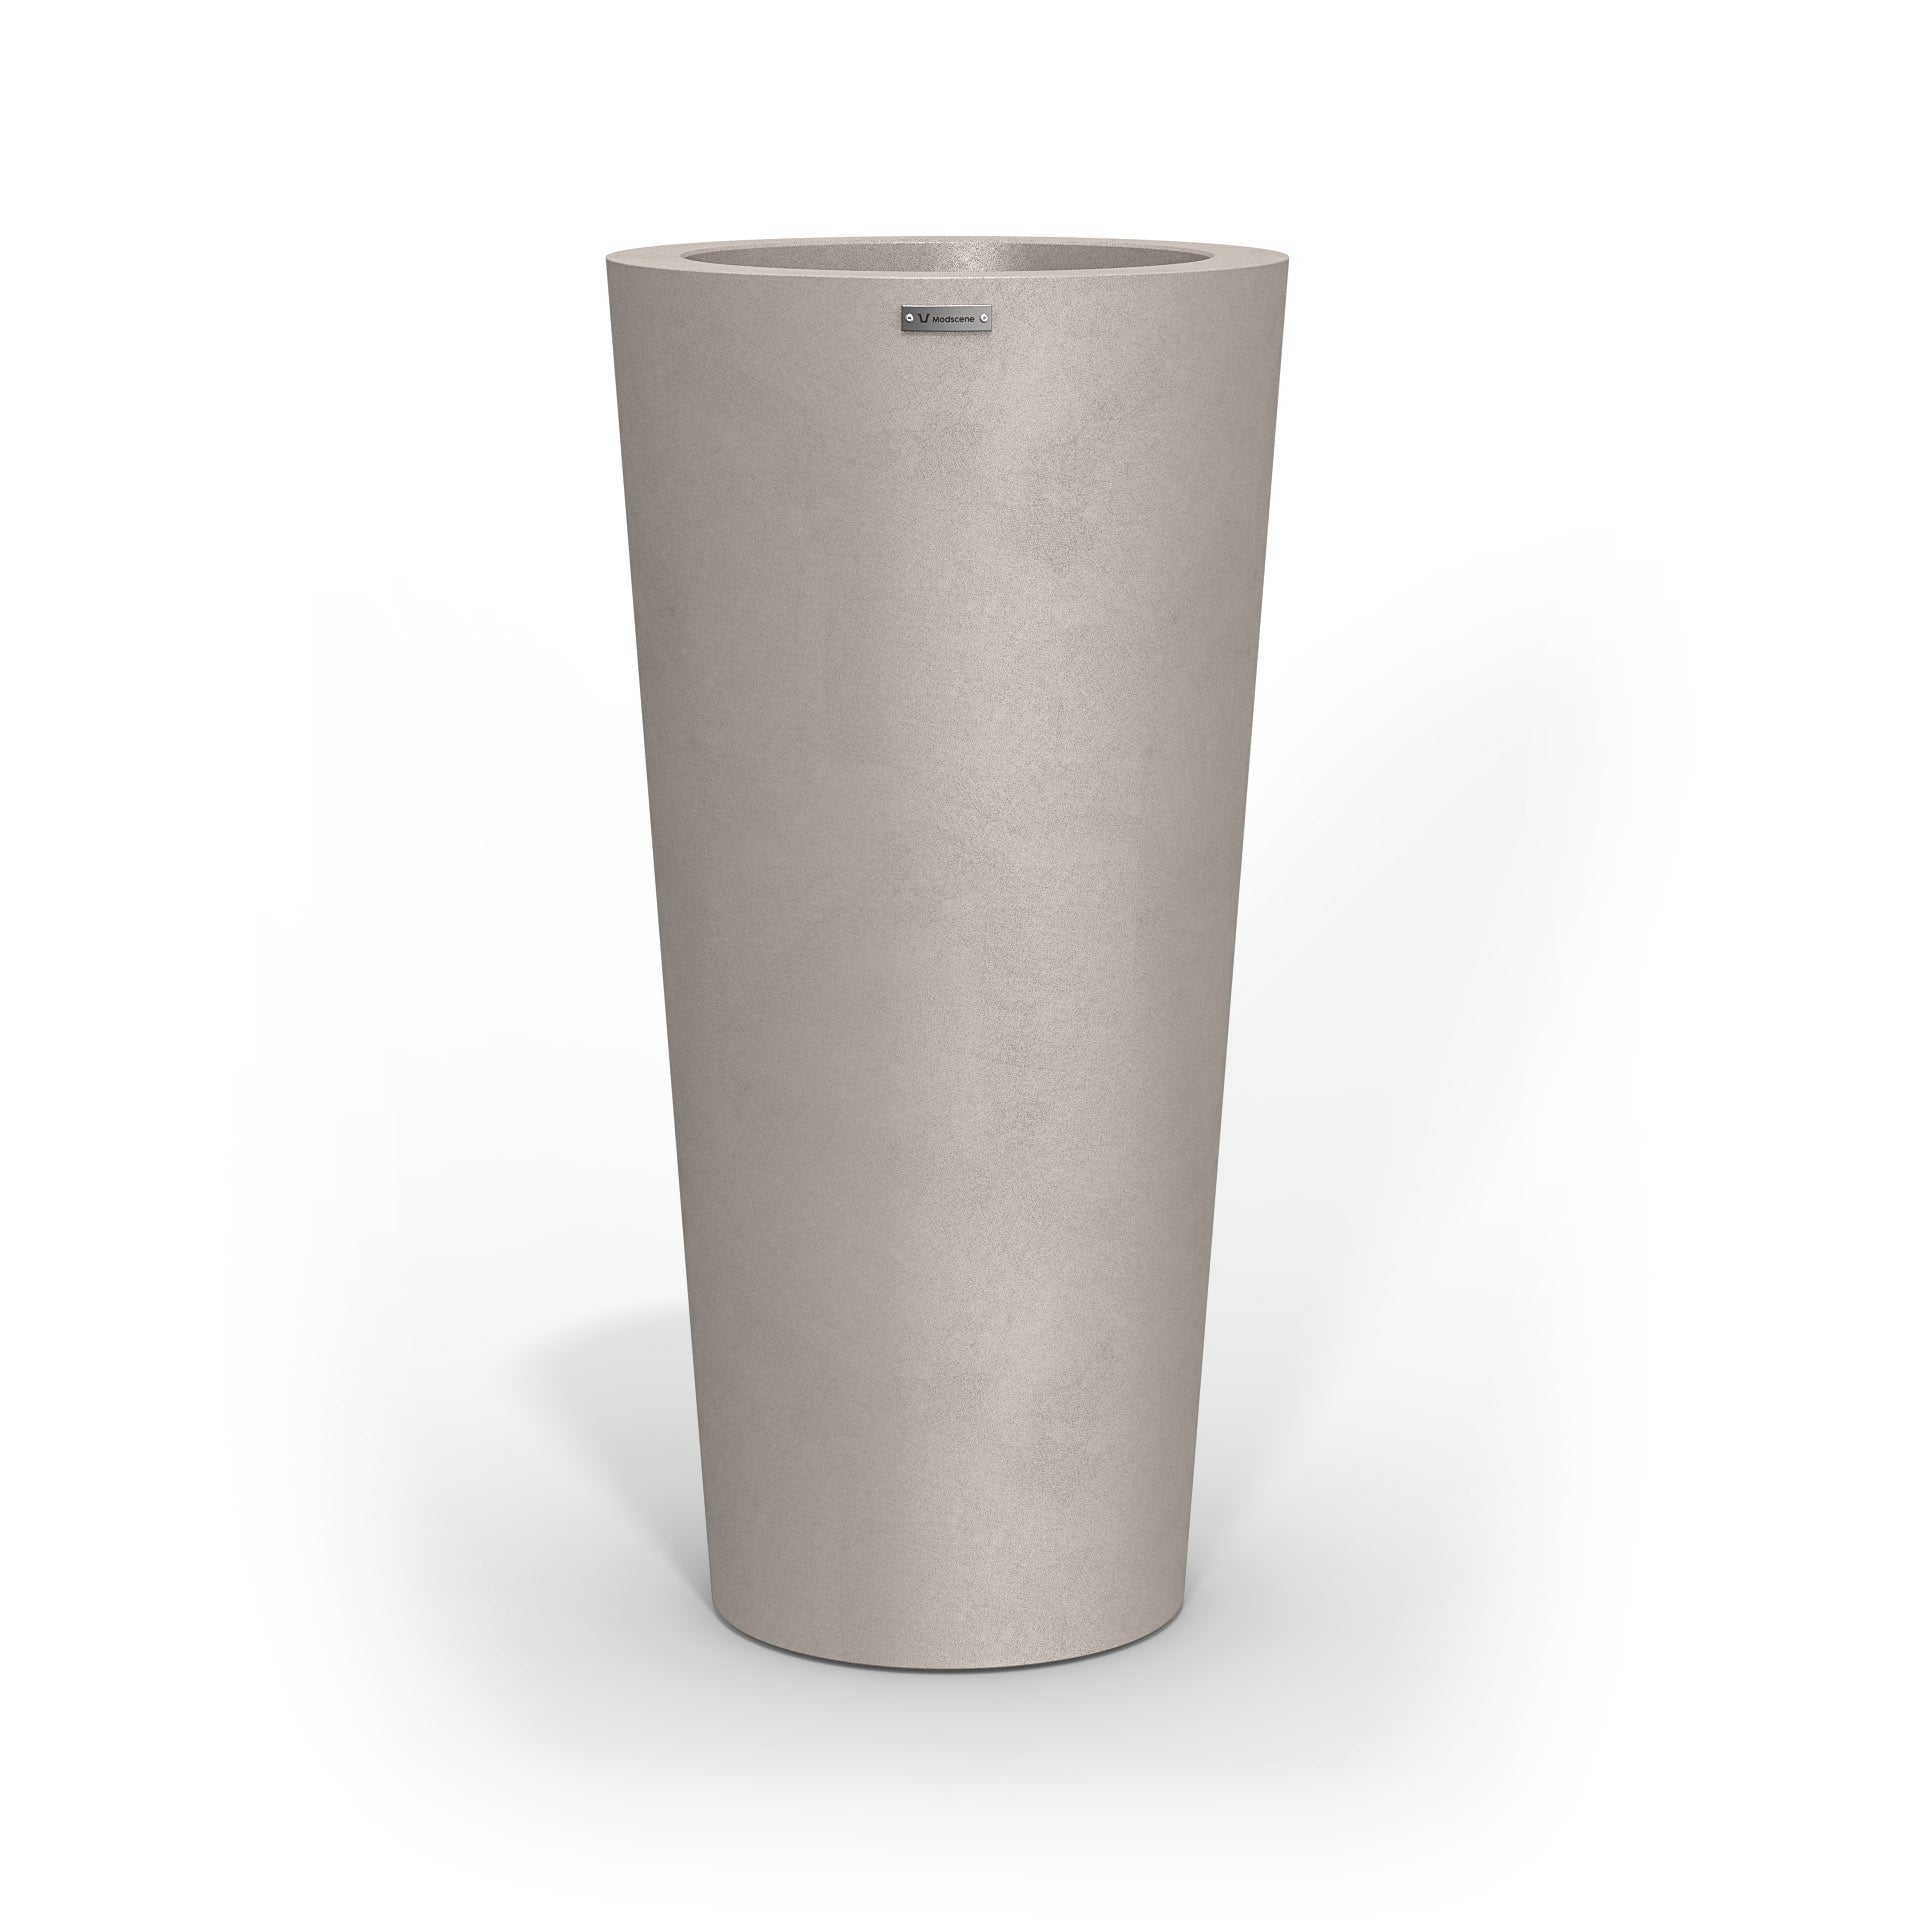 A tall Modscene planter pot in a sandstone colour with a concrete look finish.